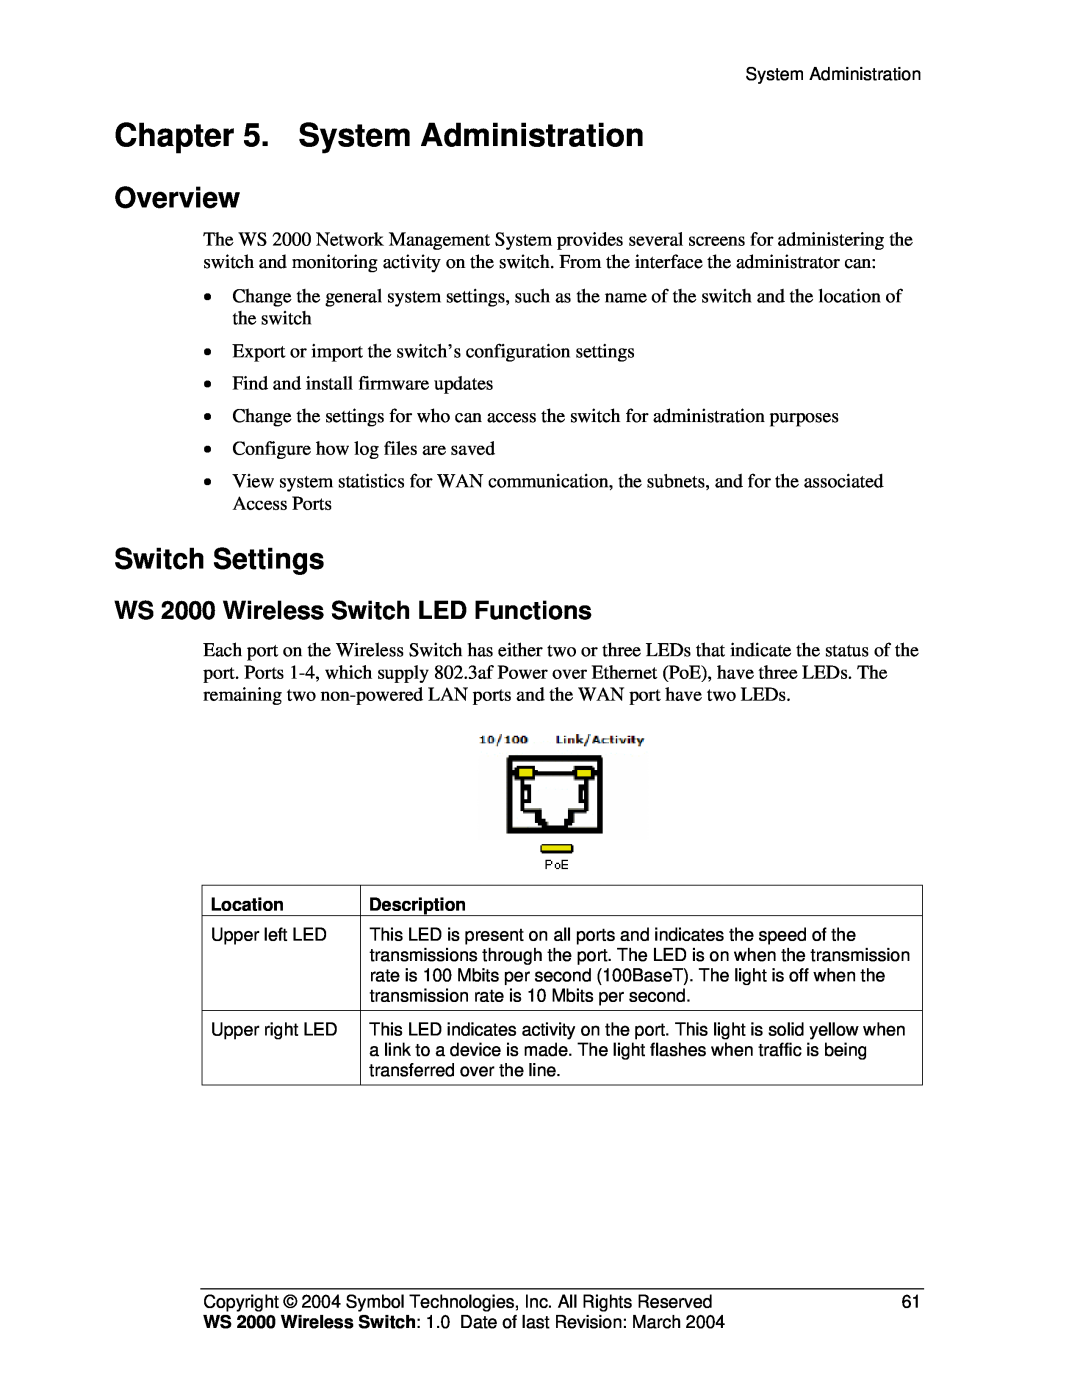 Symbol Technologies manual System Administration, Overview, Switch Settings, WS 2000 Wireless Switch LED Functions 